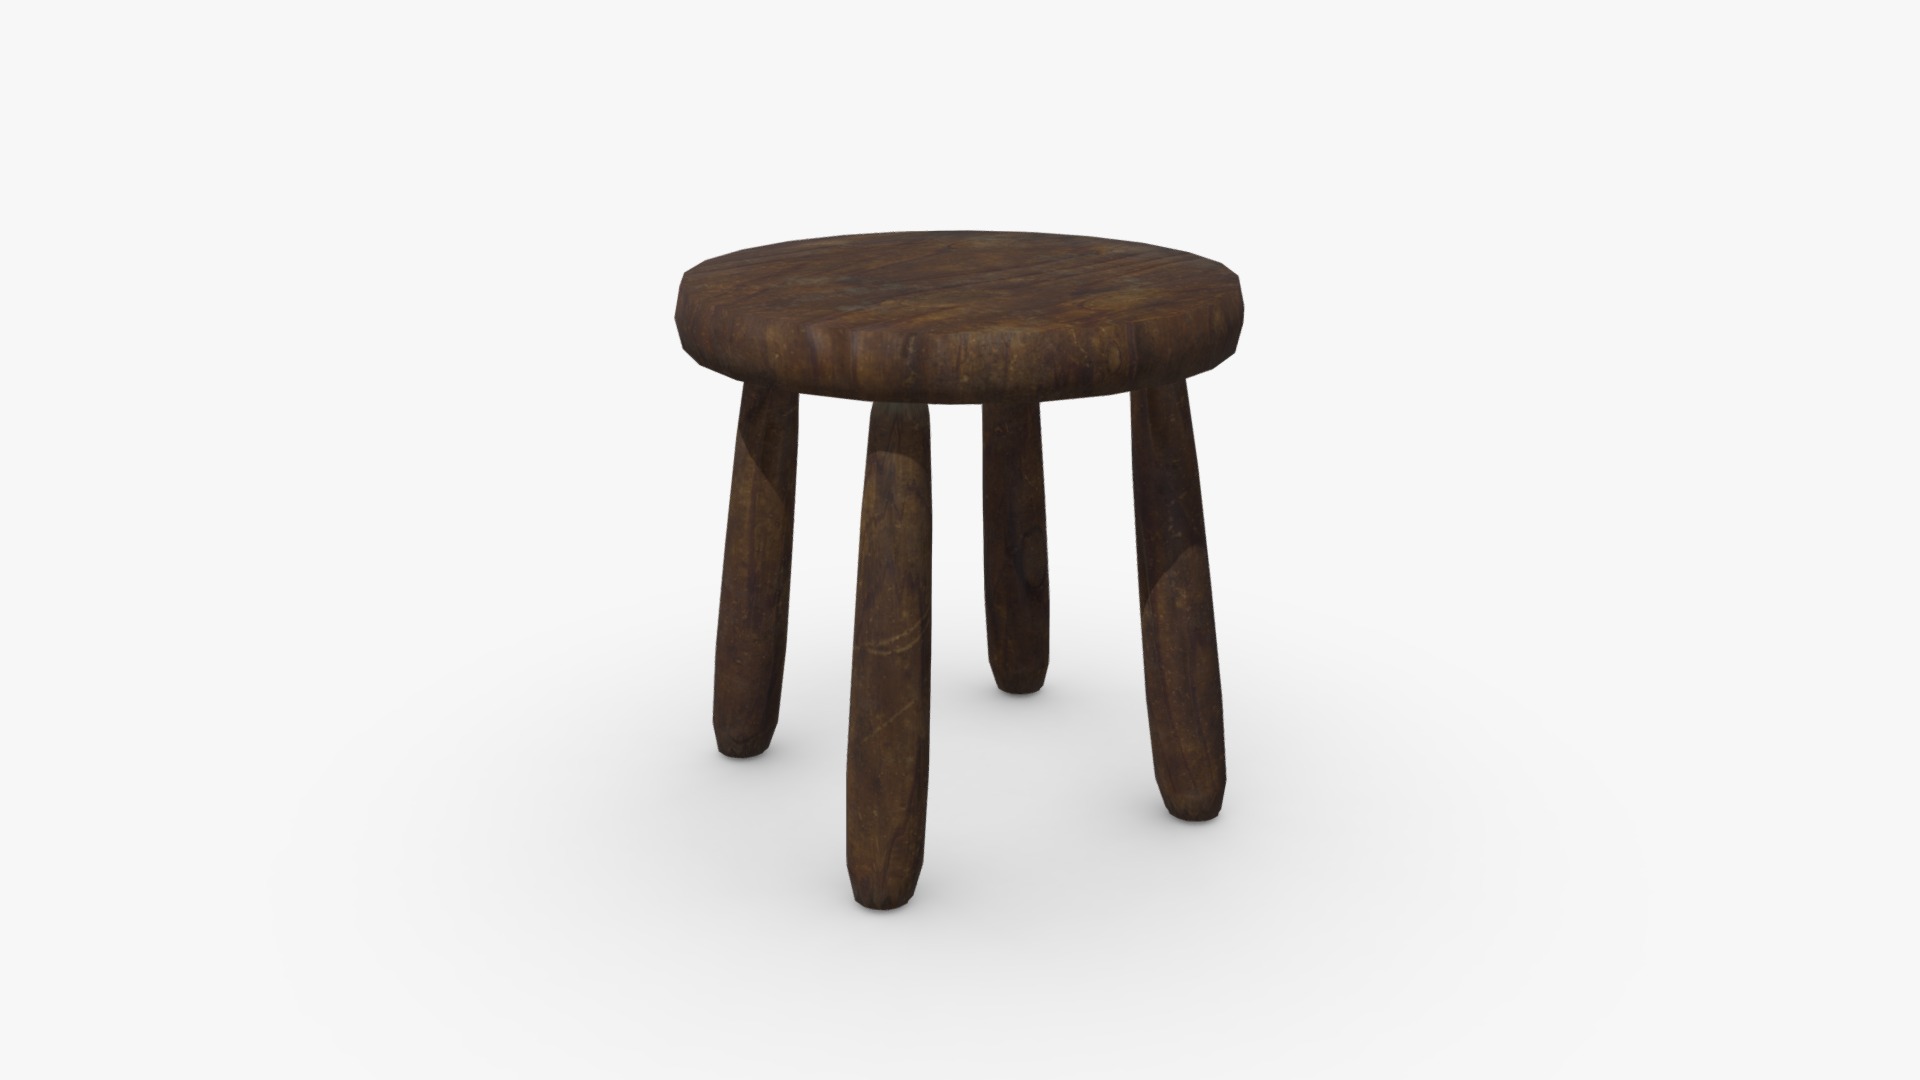 3D model Rustic Wooden Stool - This is a 3D model of the Rustic Wooden Stool. The 3D model is about a wooden table with a wooden top.